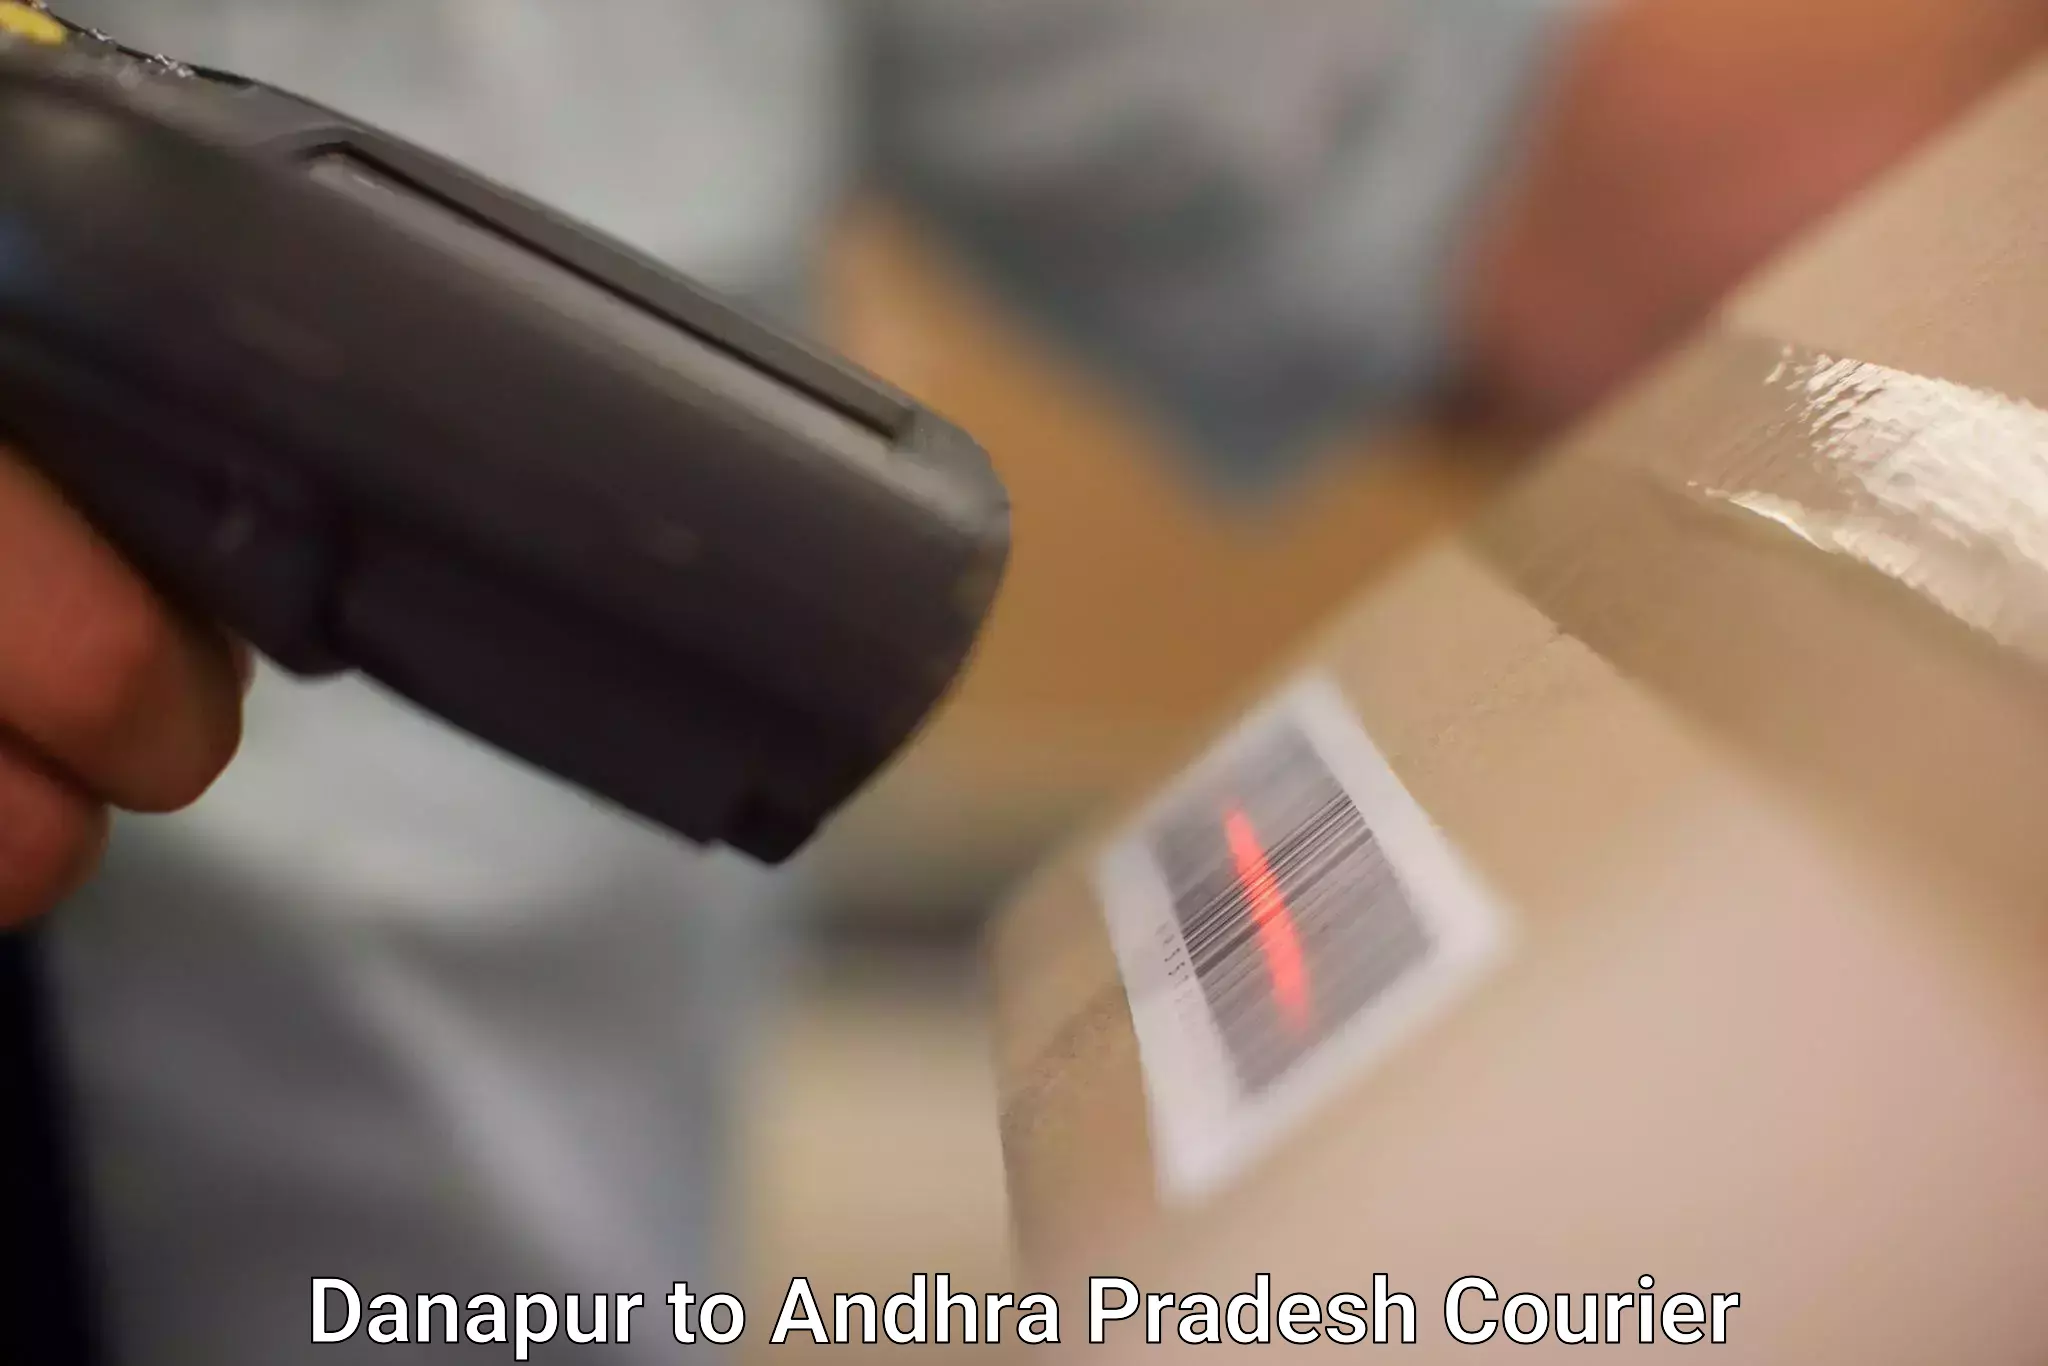 Courier dispatch services in Danapur to Malikipuram